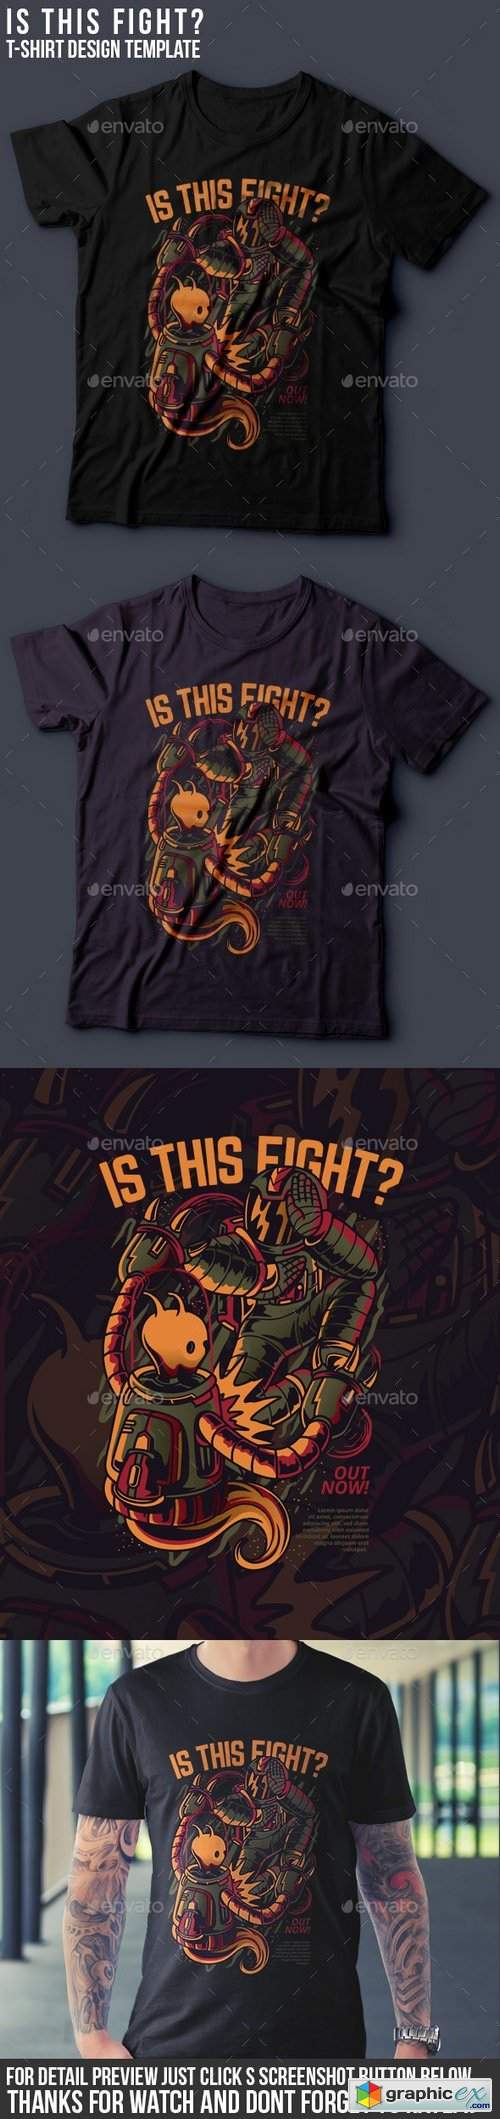 Is This Fight? T-Shirt Design